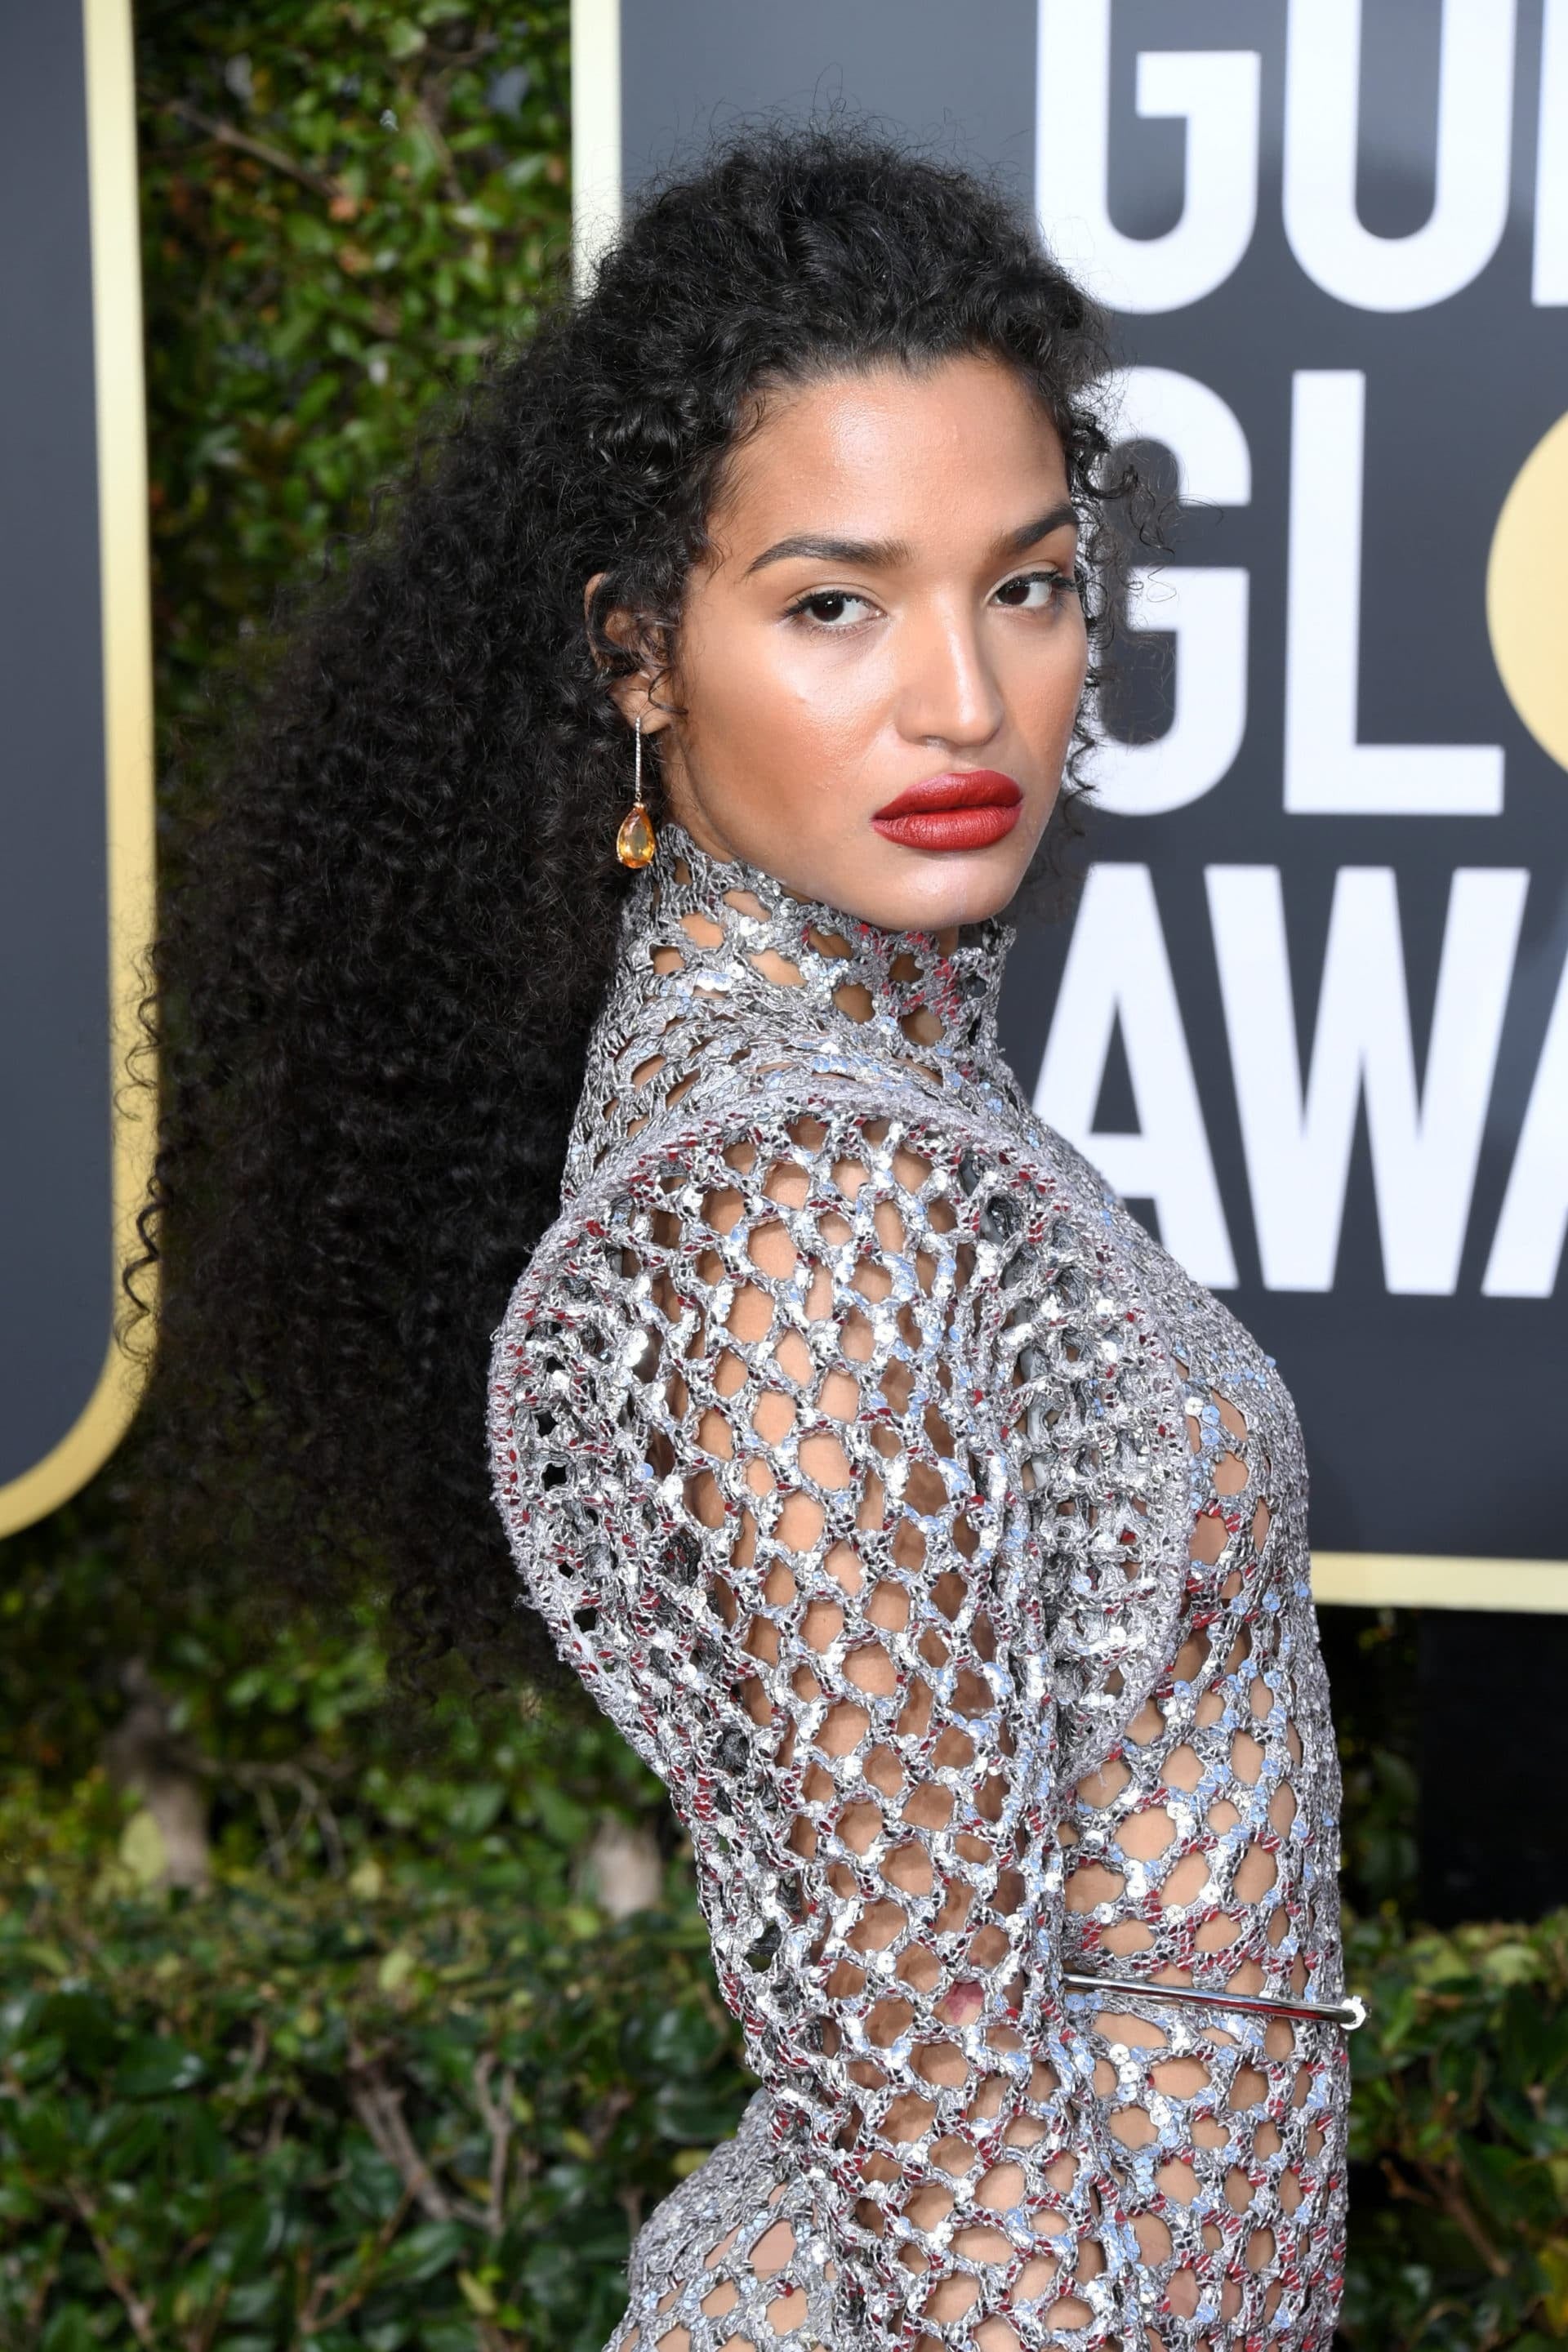 The Beauty Bar Is Set High, Thanks To These Glam-Looks At The 76th Annual Golden Globes